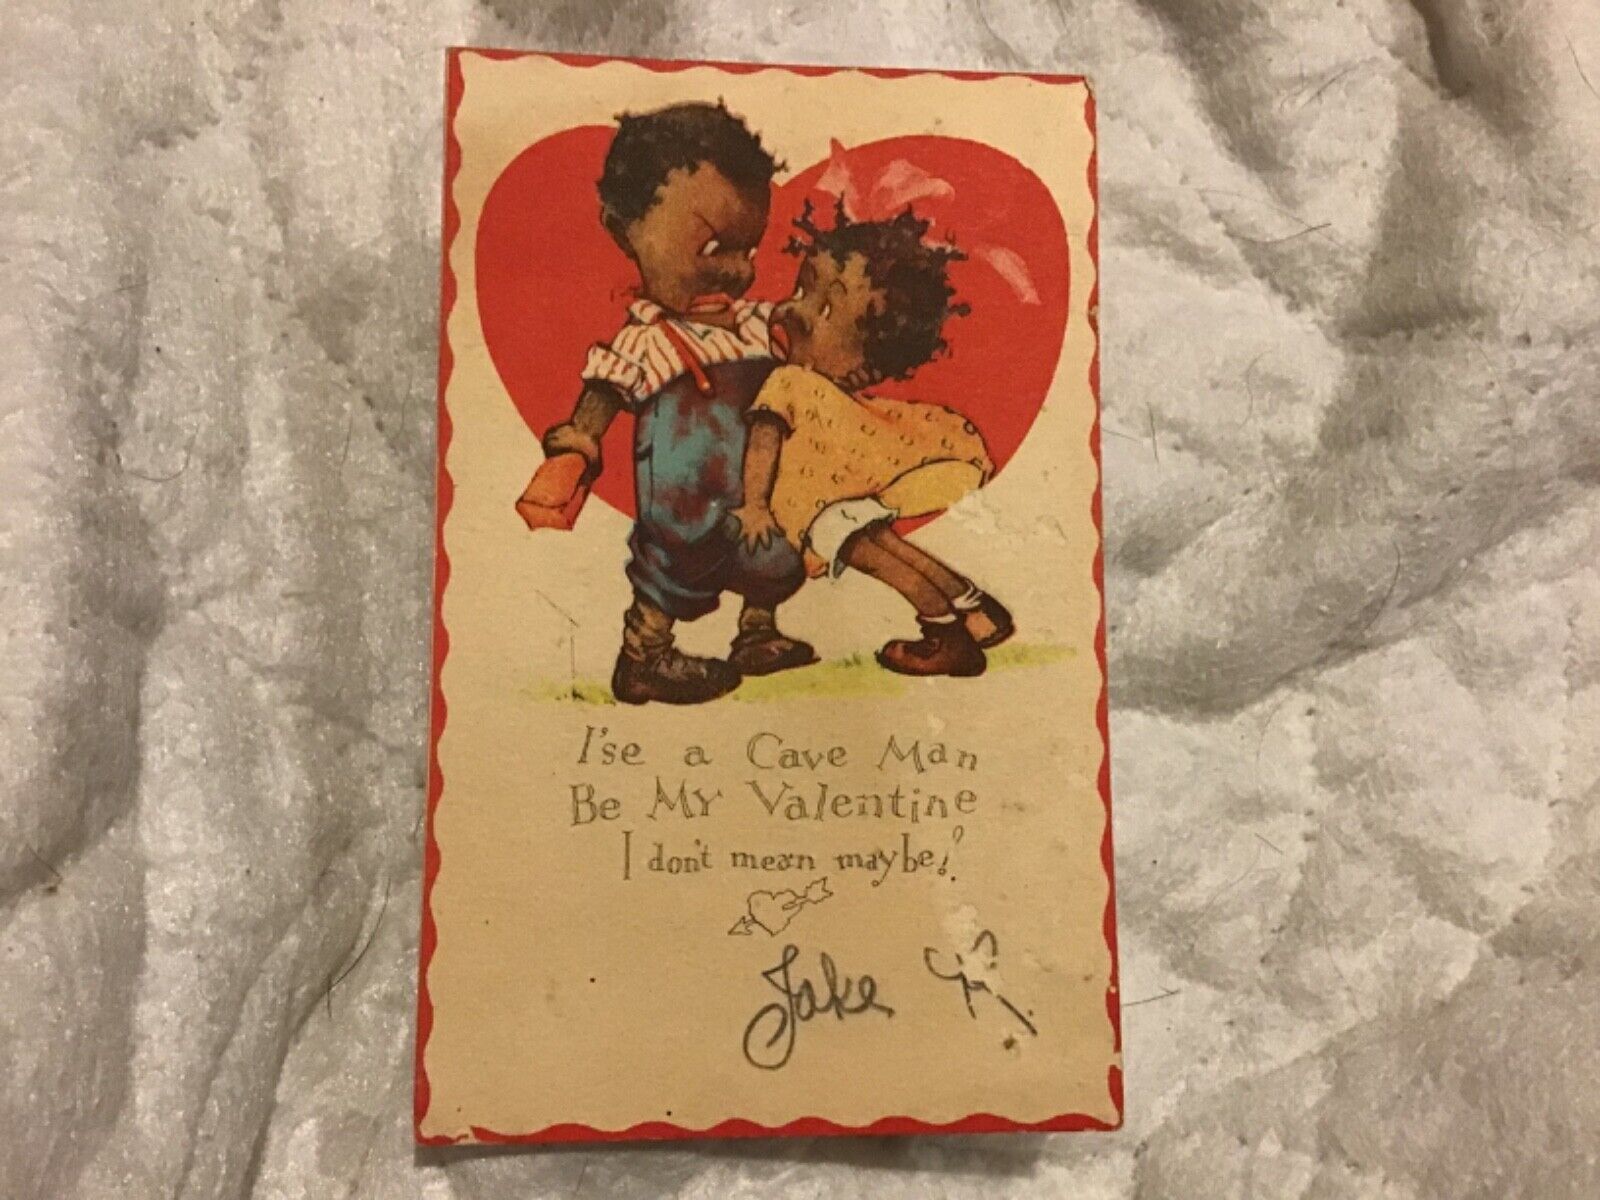 SUPER RARE VALENTINE POST CARD FROM EARLY 1900’s